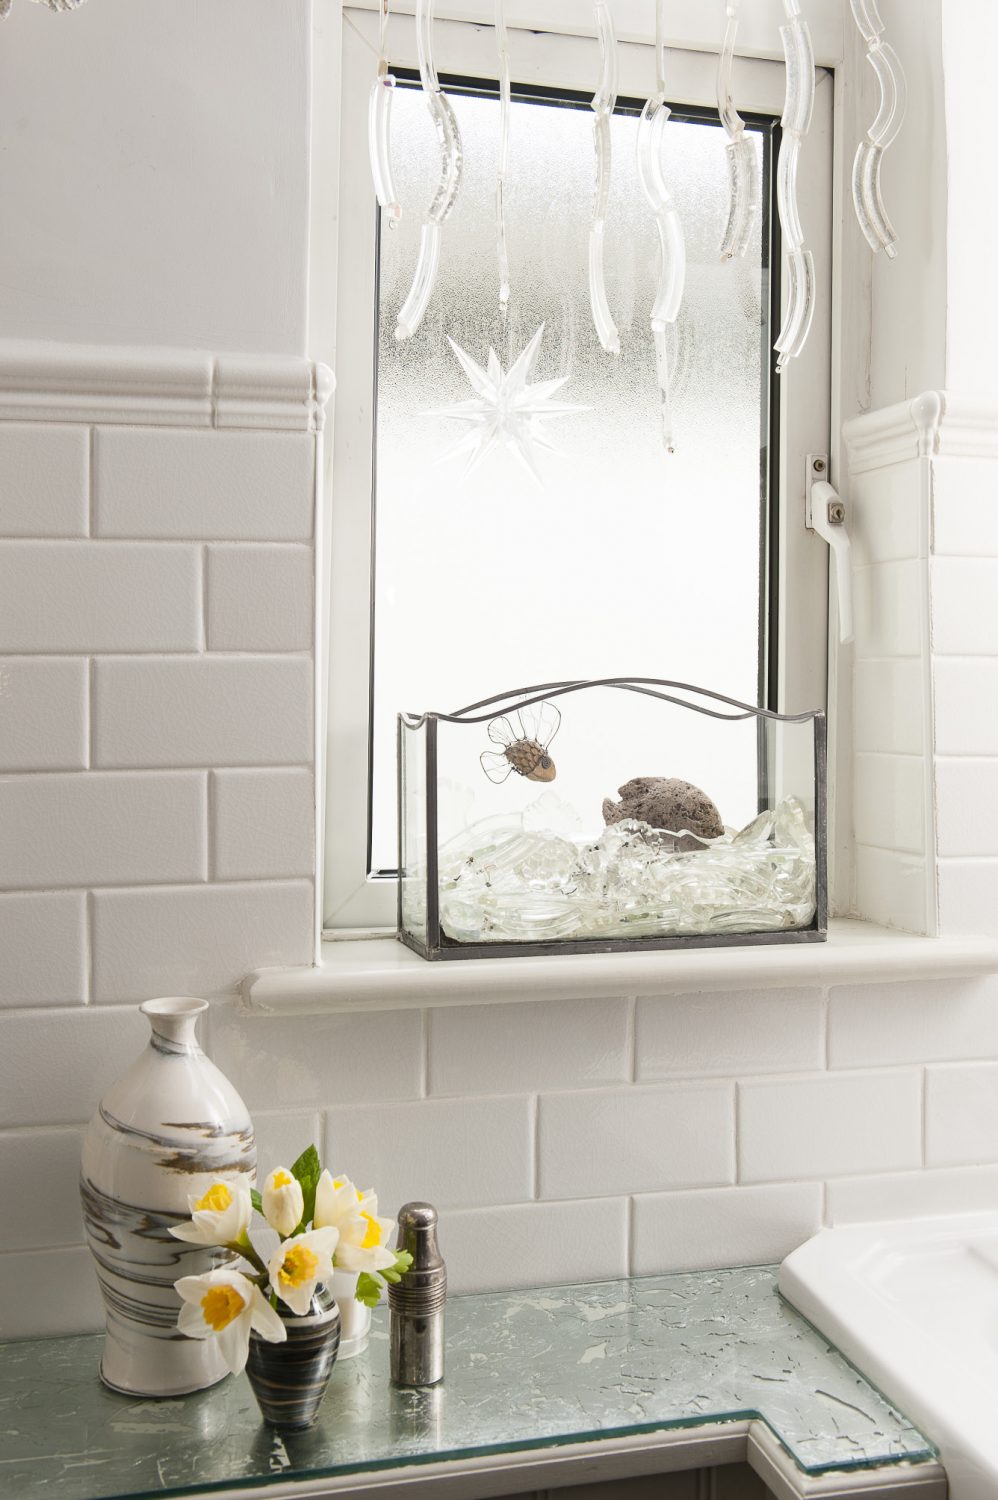 In the bathroom, Trudi has hung glass fragments in the window and created a mock aquarium using salvaged glass, crystal and a little hand-made wire and pebble fish. The off-white tiles are from Fired Earth – a more classic version of Metro tiles, but crackle glazed